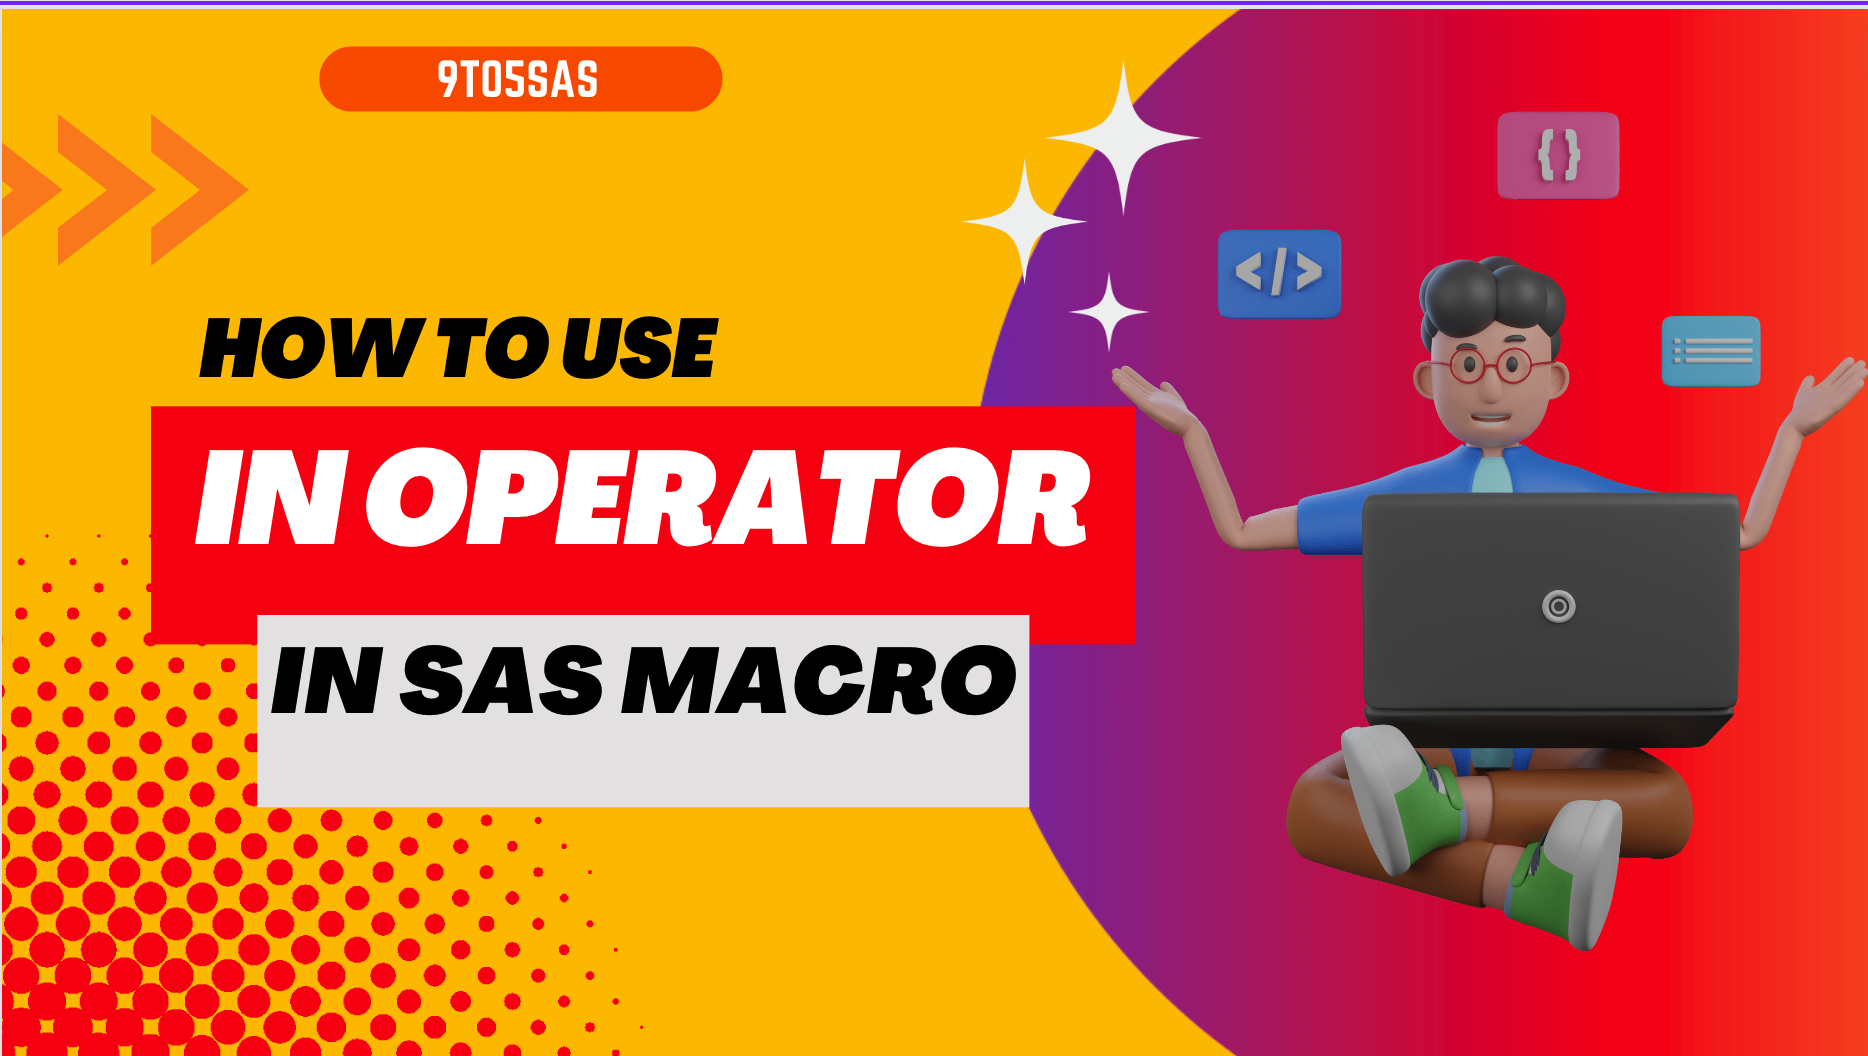 How to use the IN operator in SAS macro?